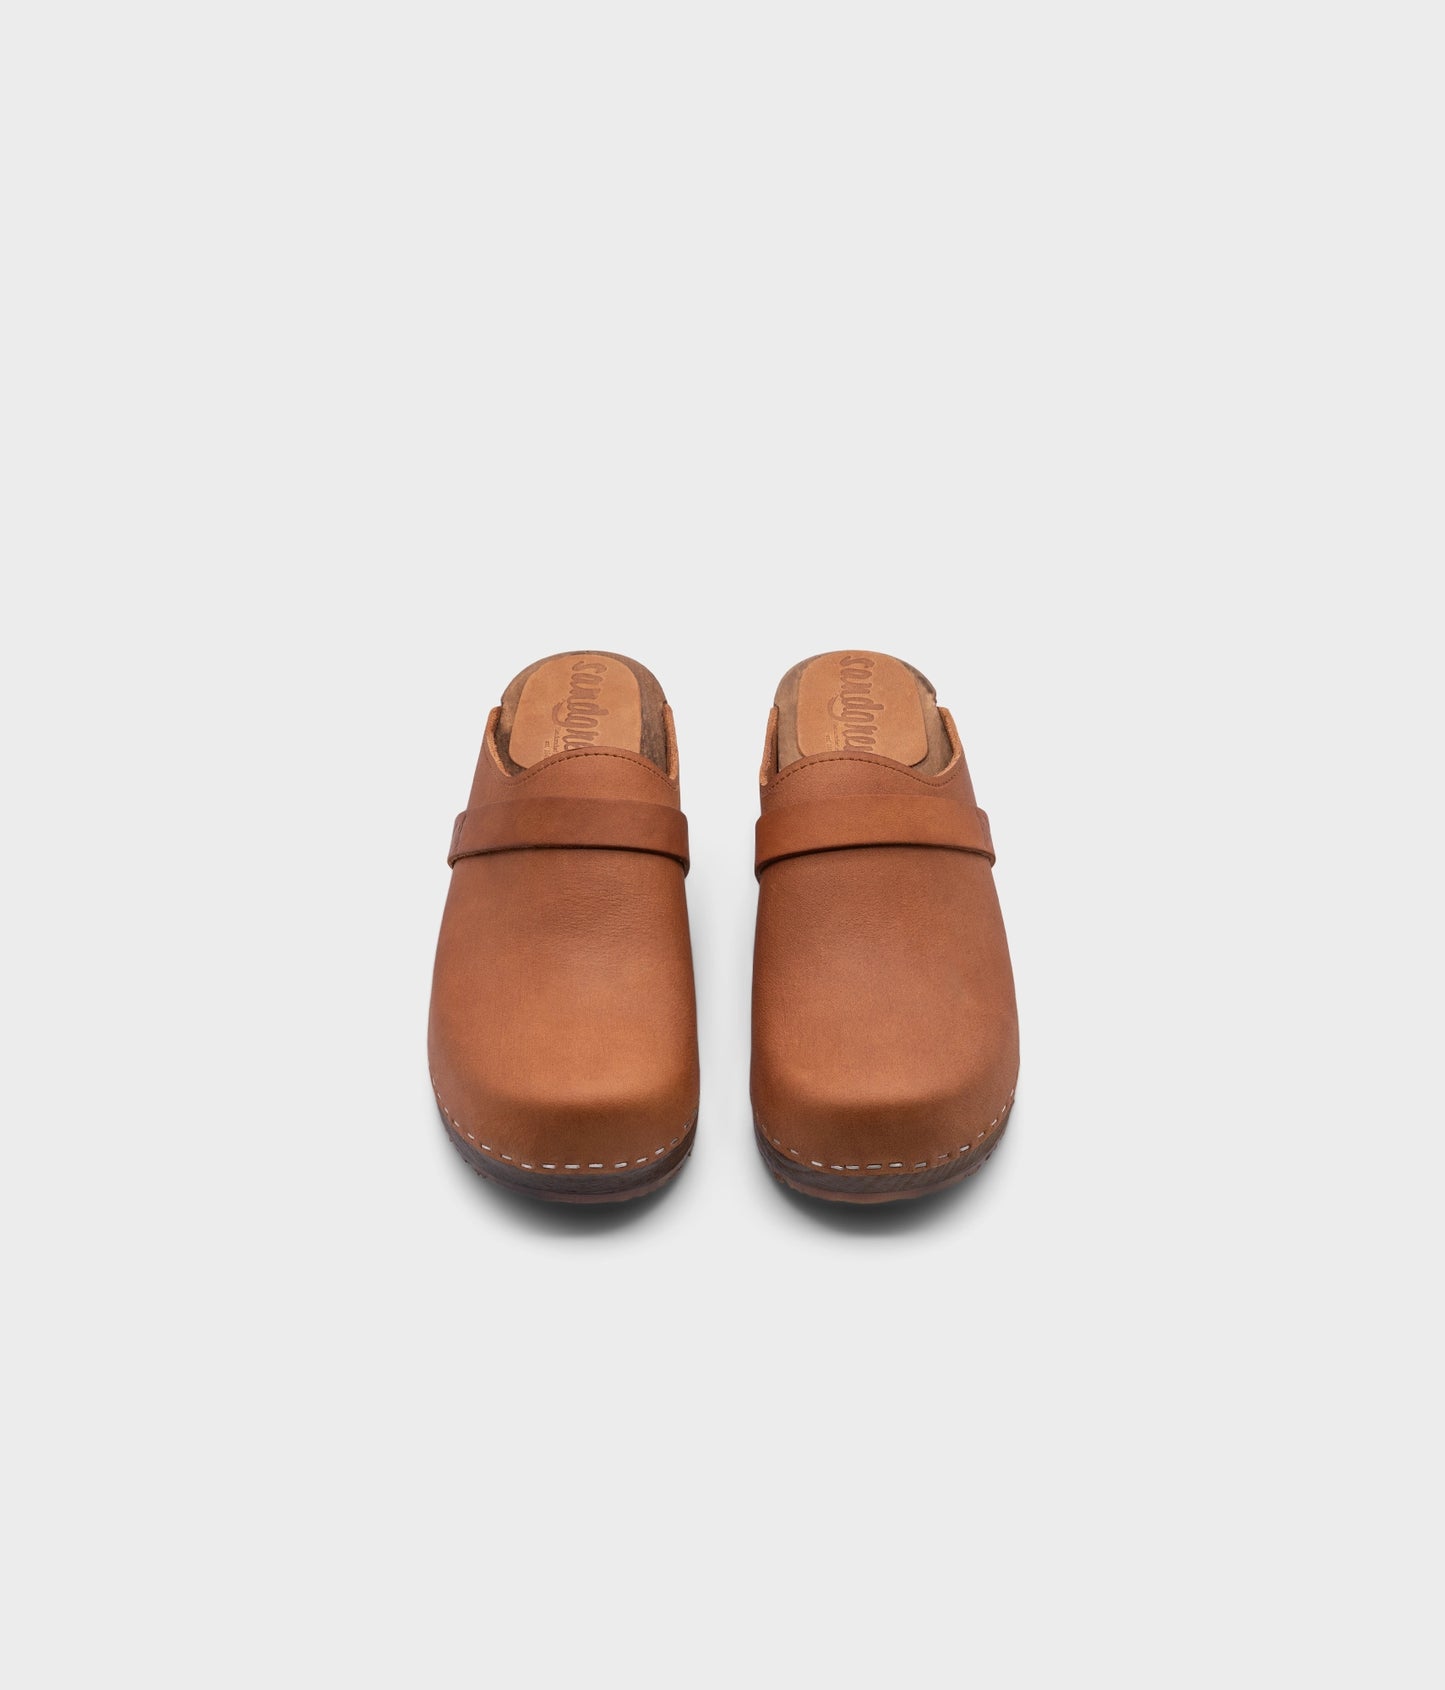 classic low heeled clog mule in light brown nubuck leather stapled on a dark wooden base with a leather strap